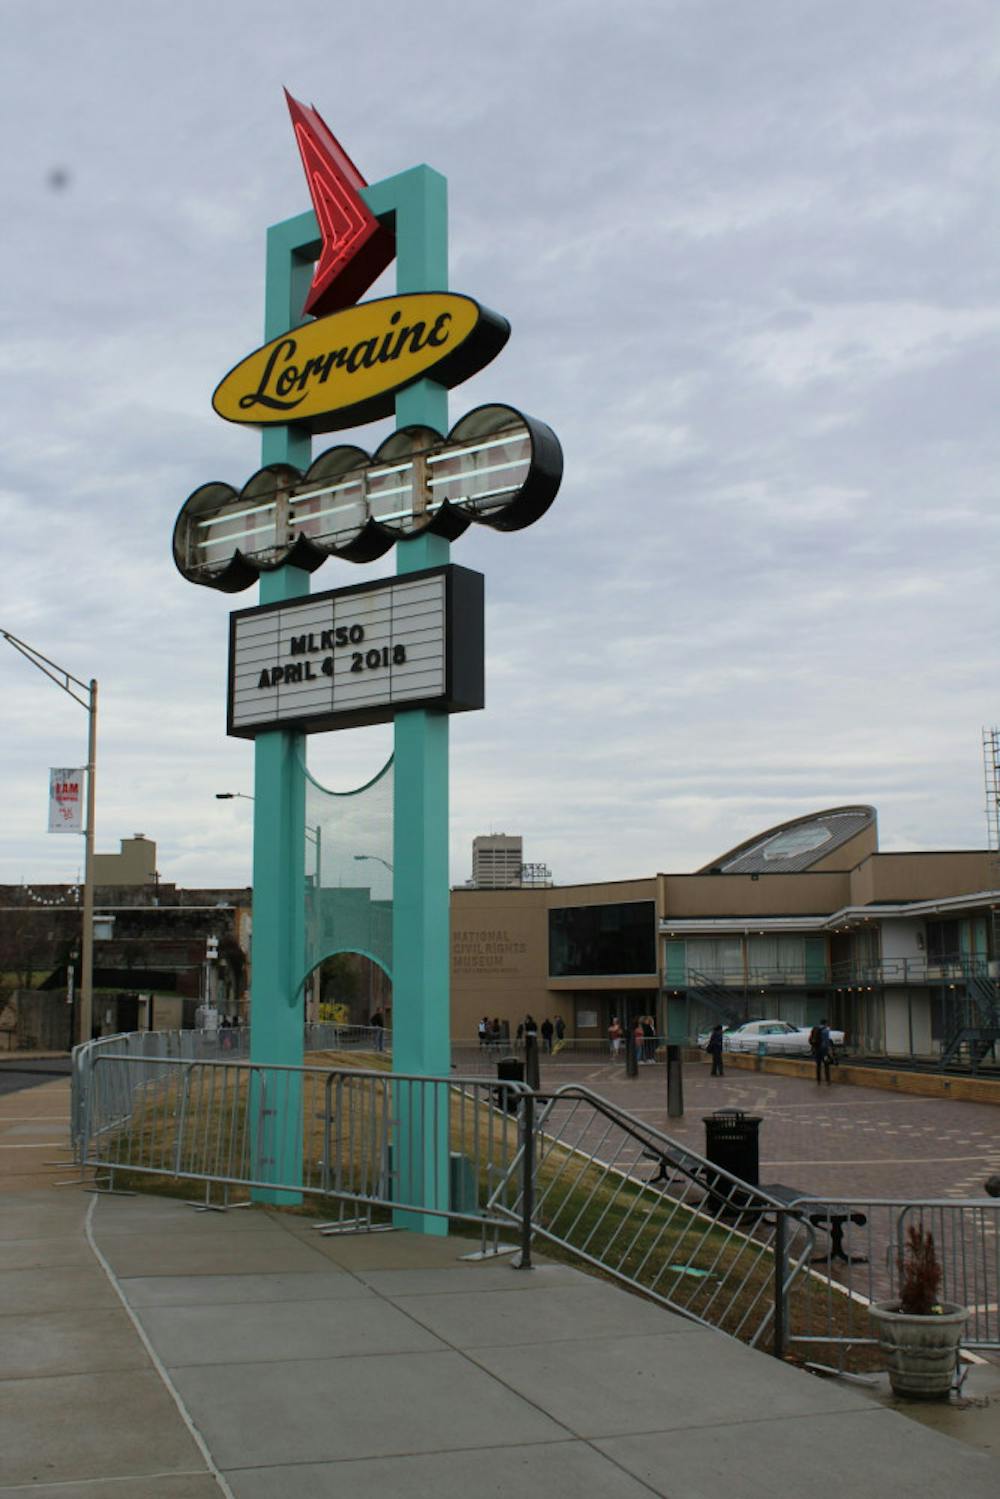 <p>The Civil Rights Museum is preparing for the 50th anniversary of Dr. Martin Luther King, Jr. assignation at the Lorraine Motel. On April 4, people will be gathered at the Lorraine Motel to remember the late King.</p>